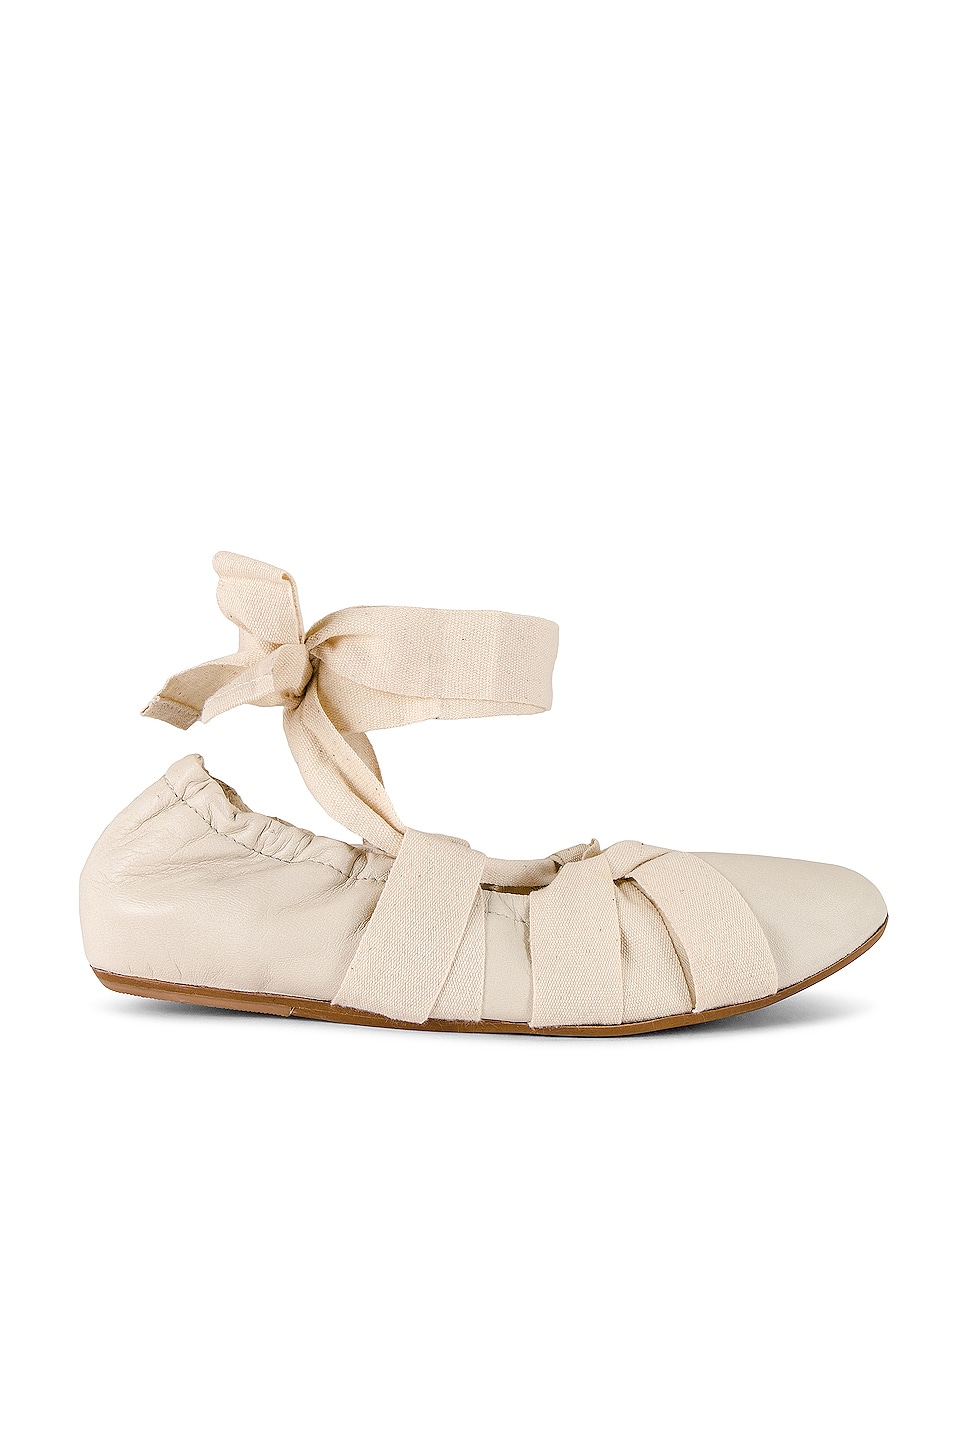 Free People Cece Wrap Ballet Flat in Antique White | REVOLVE